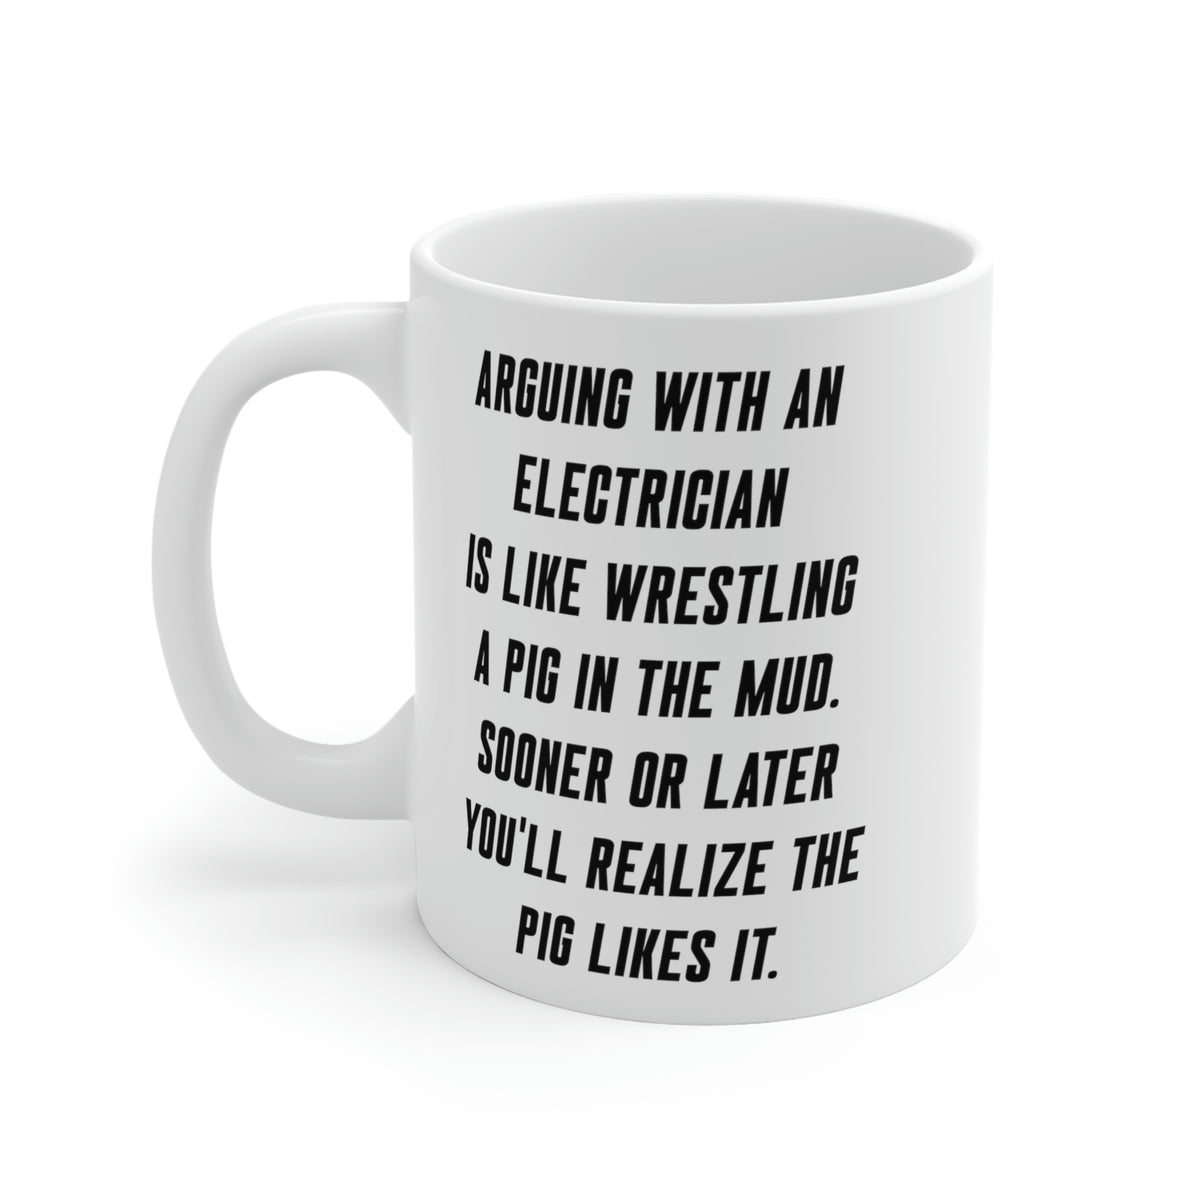 Funny Electrician 11oz Coffee Mug - Arguing With A Electrician Is Like Wrestling A Pig In The Mud - Best Inspirational Gifts and Sarcasm